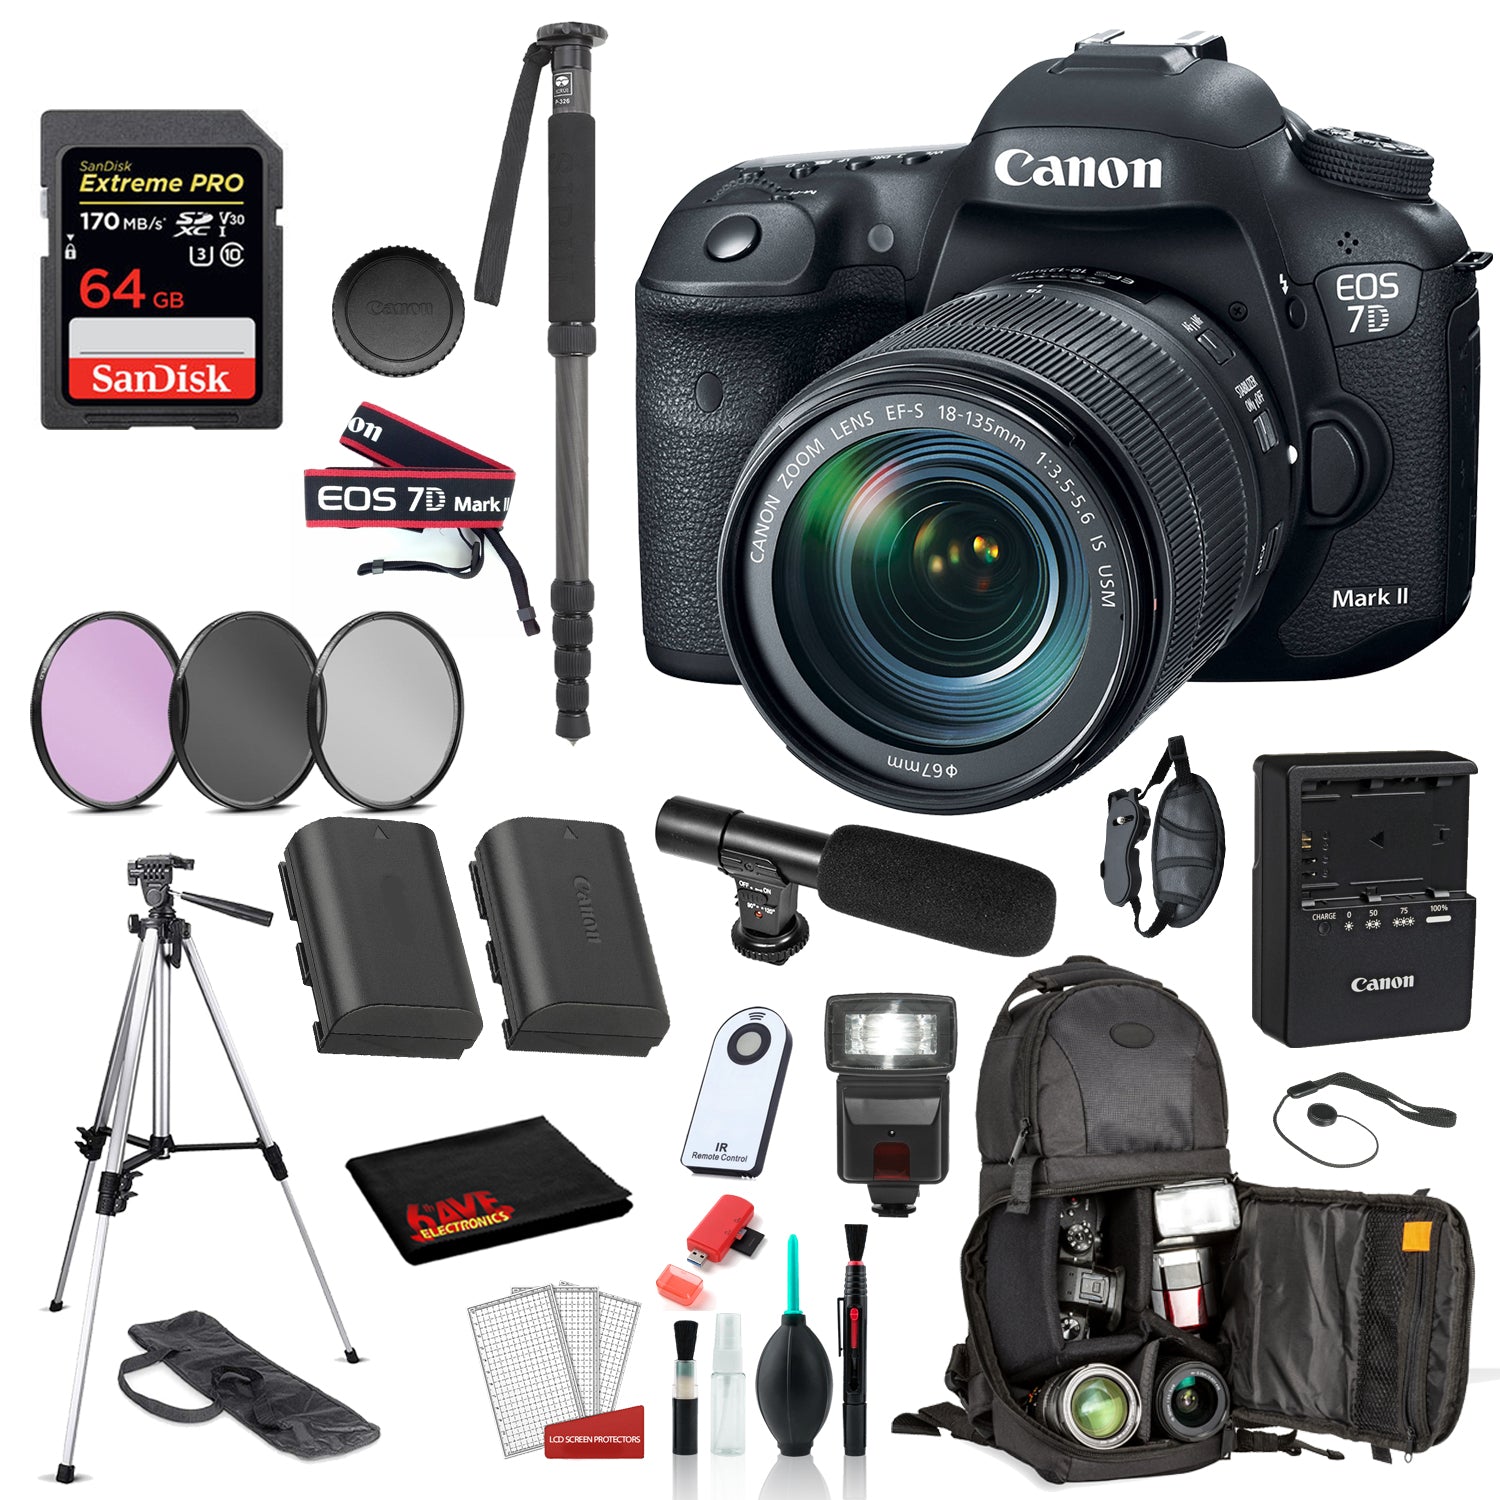 Canon EOS 7D Mark II DSLR Camera with 18-135mm f/3.5-5.6 IS USM Lens Bundle �SanDisk Extreme Pro 64gb SD +  MORE